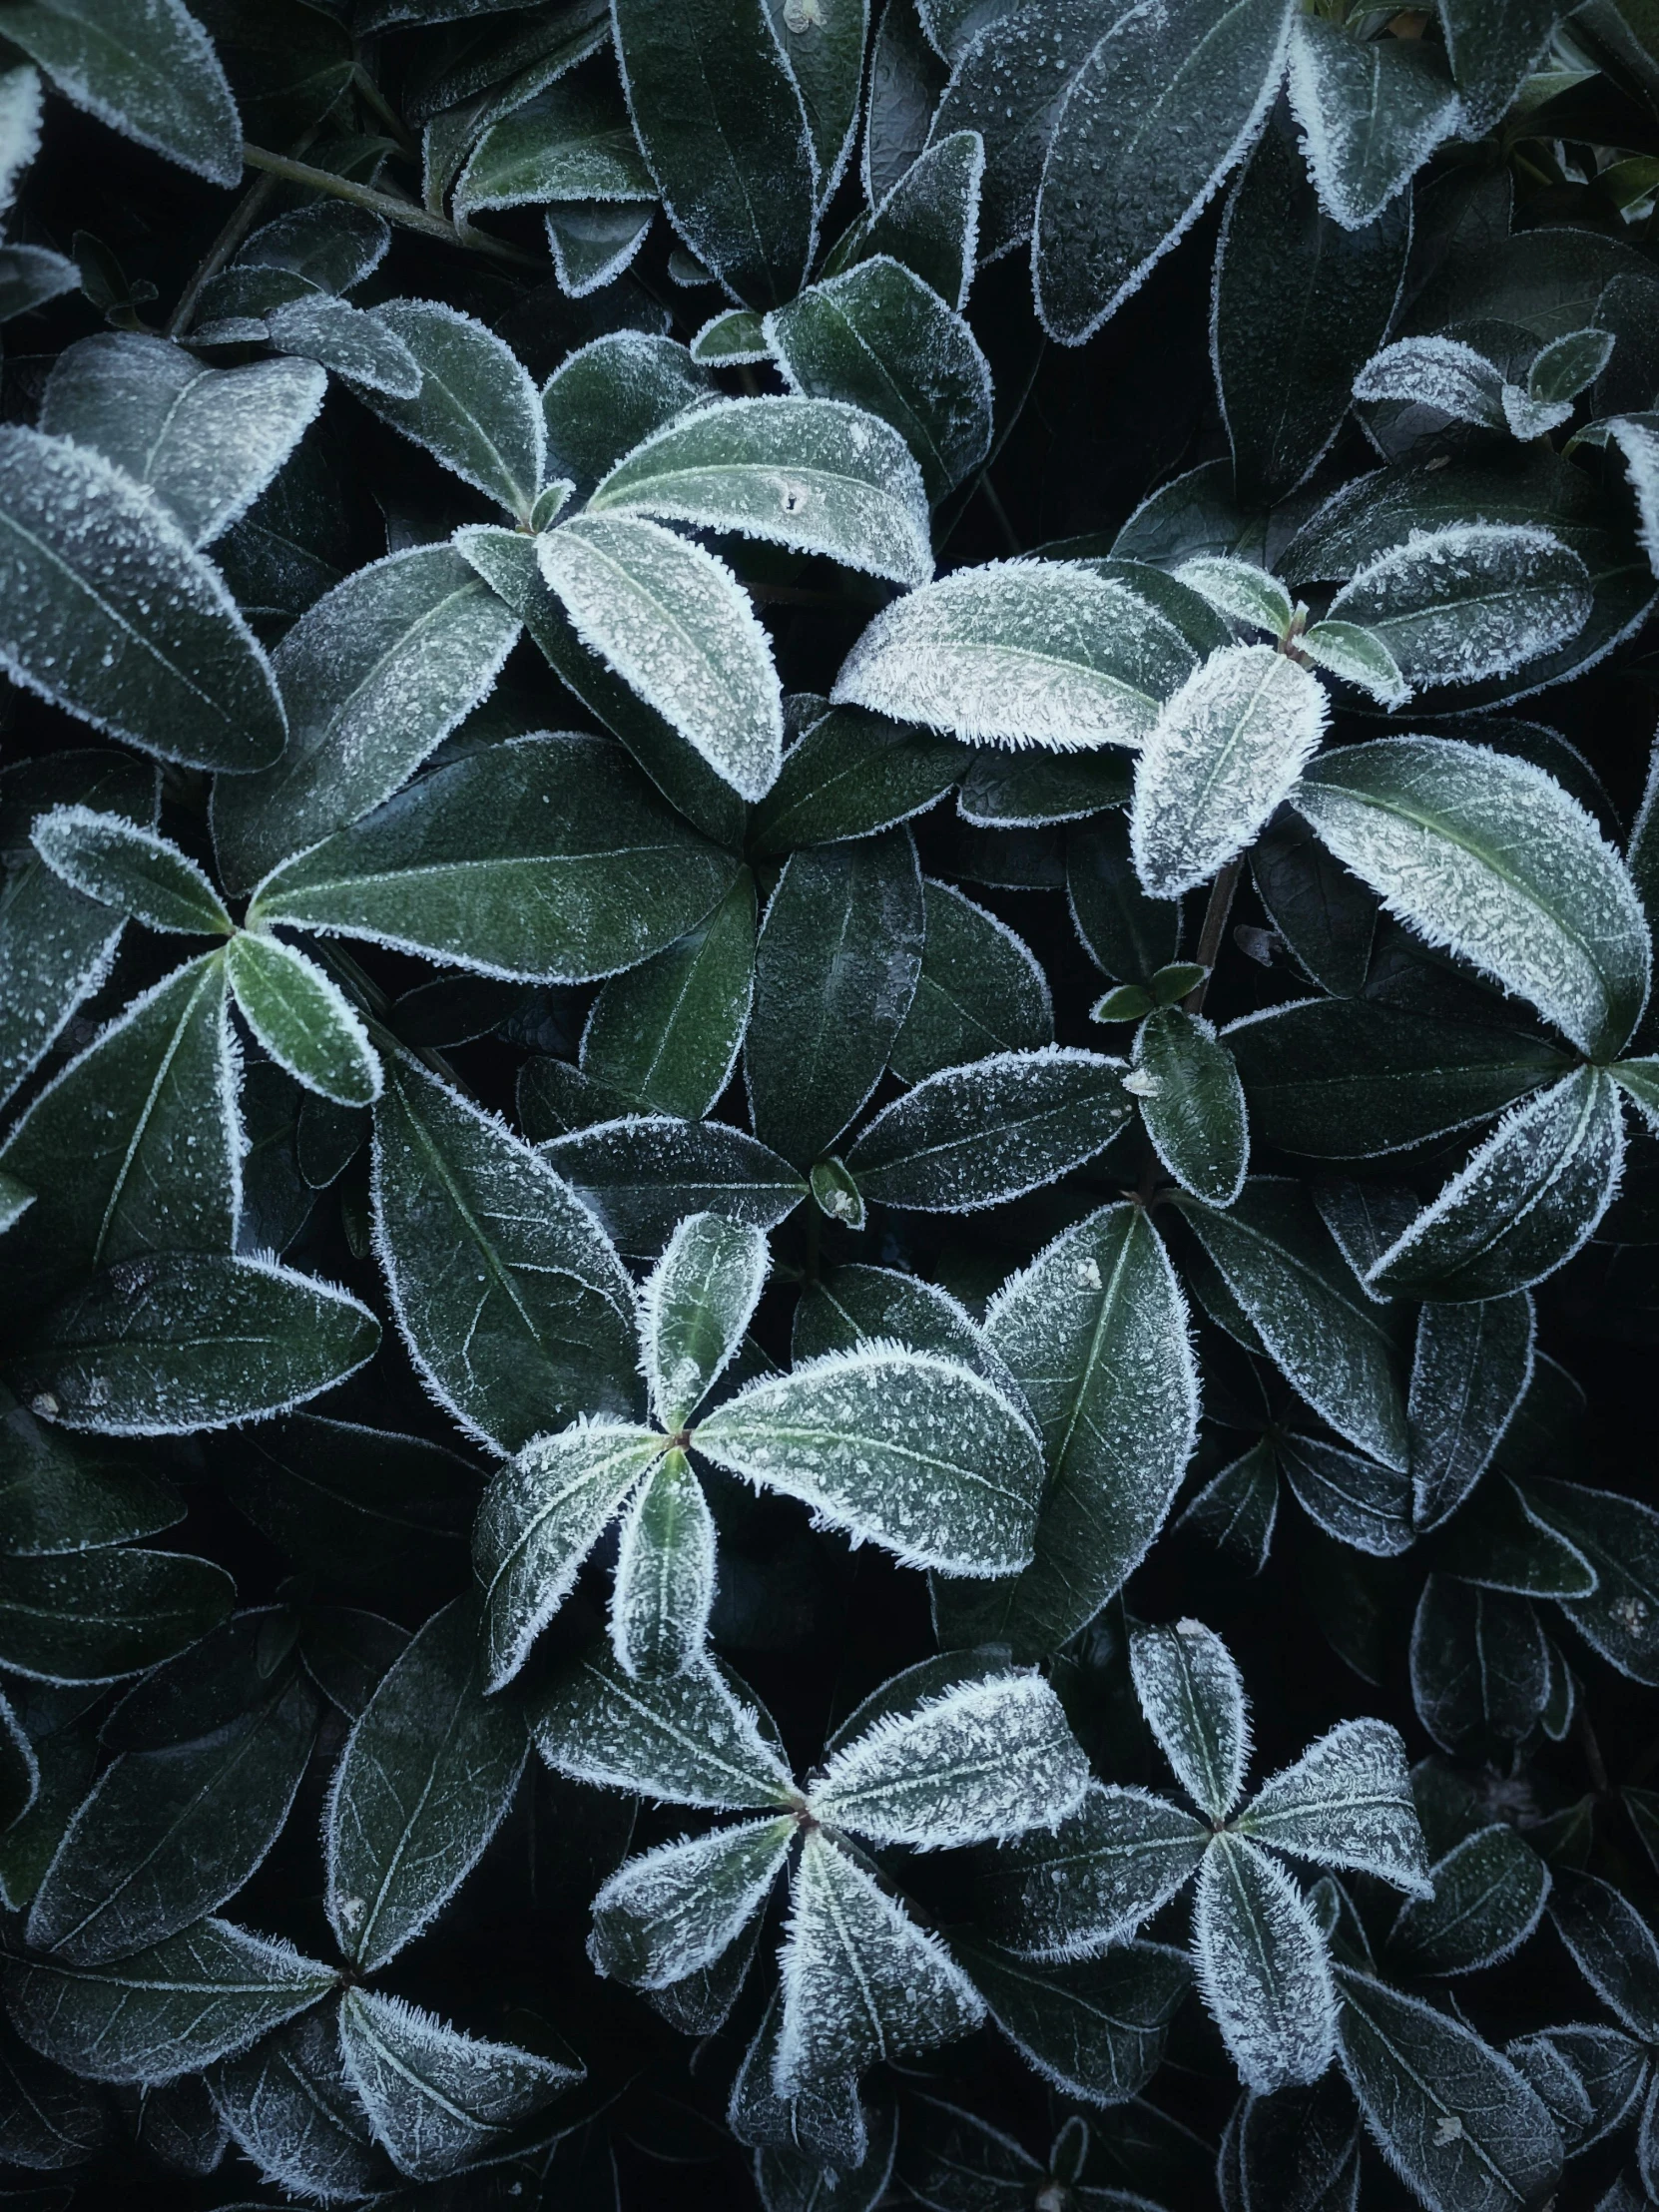 frozen leaves are shown with the dark background